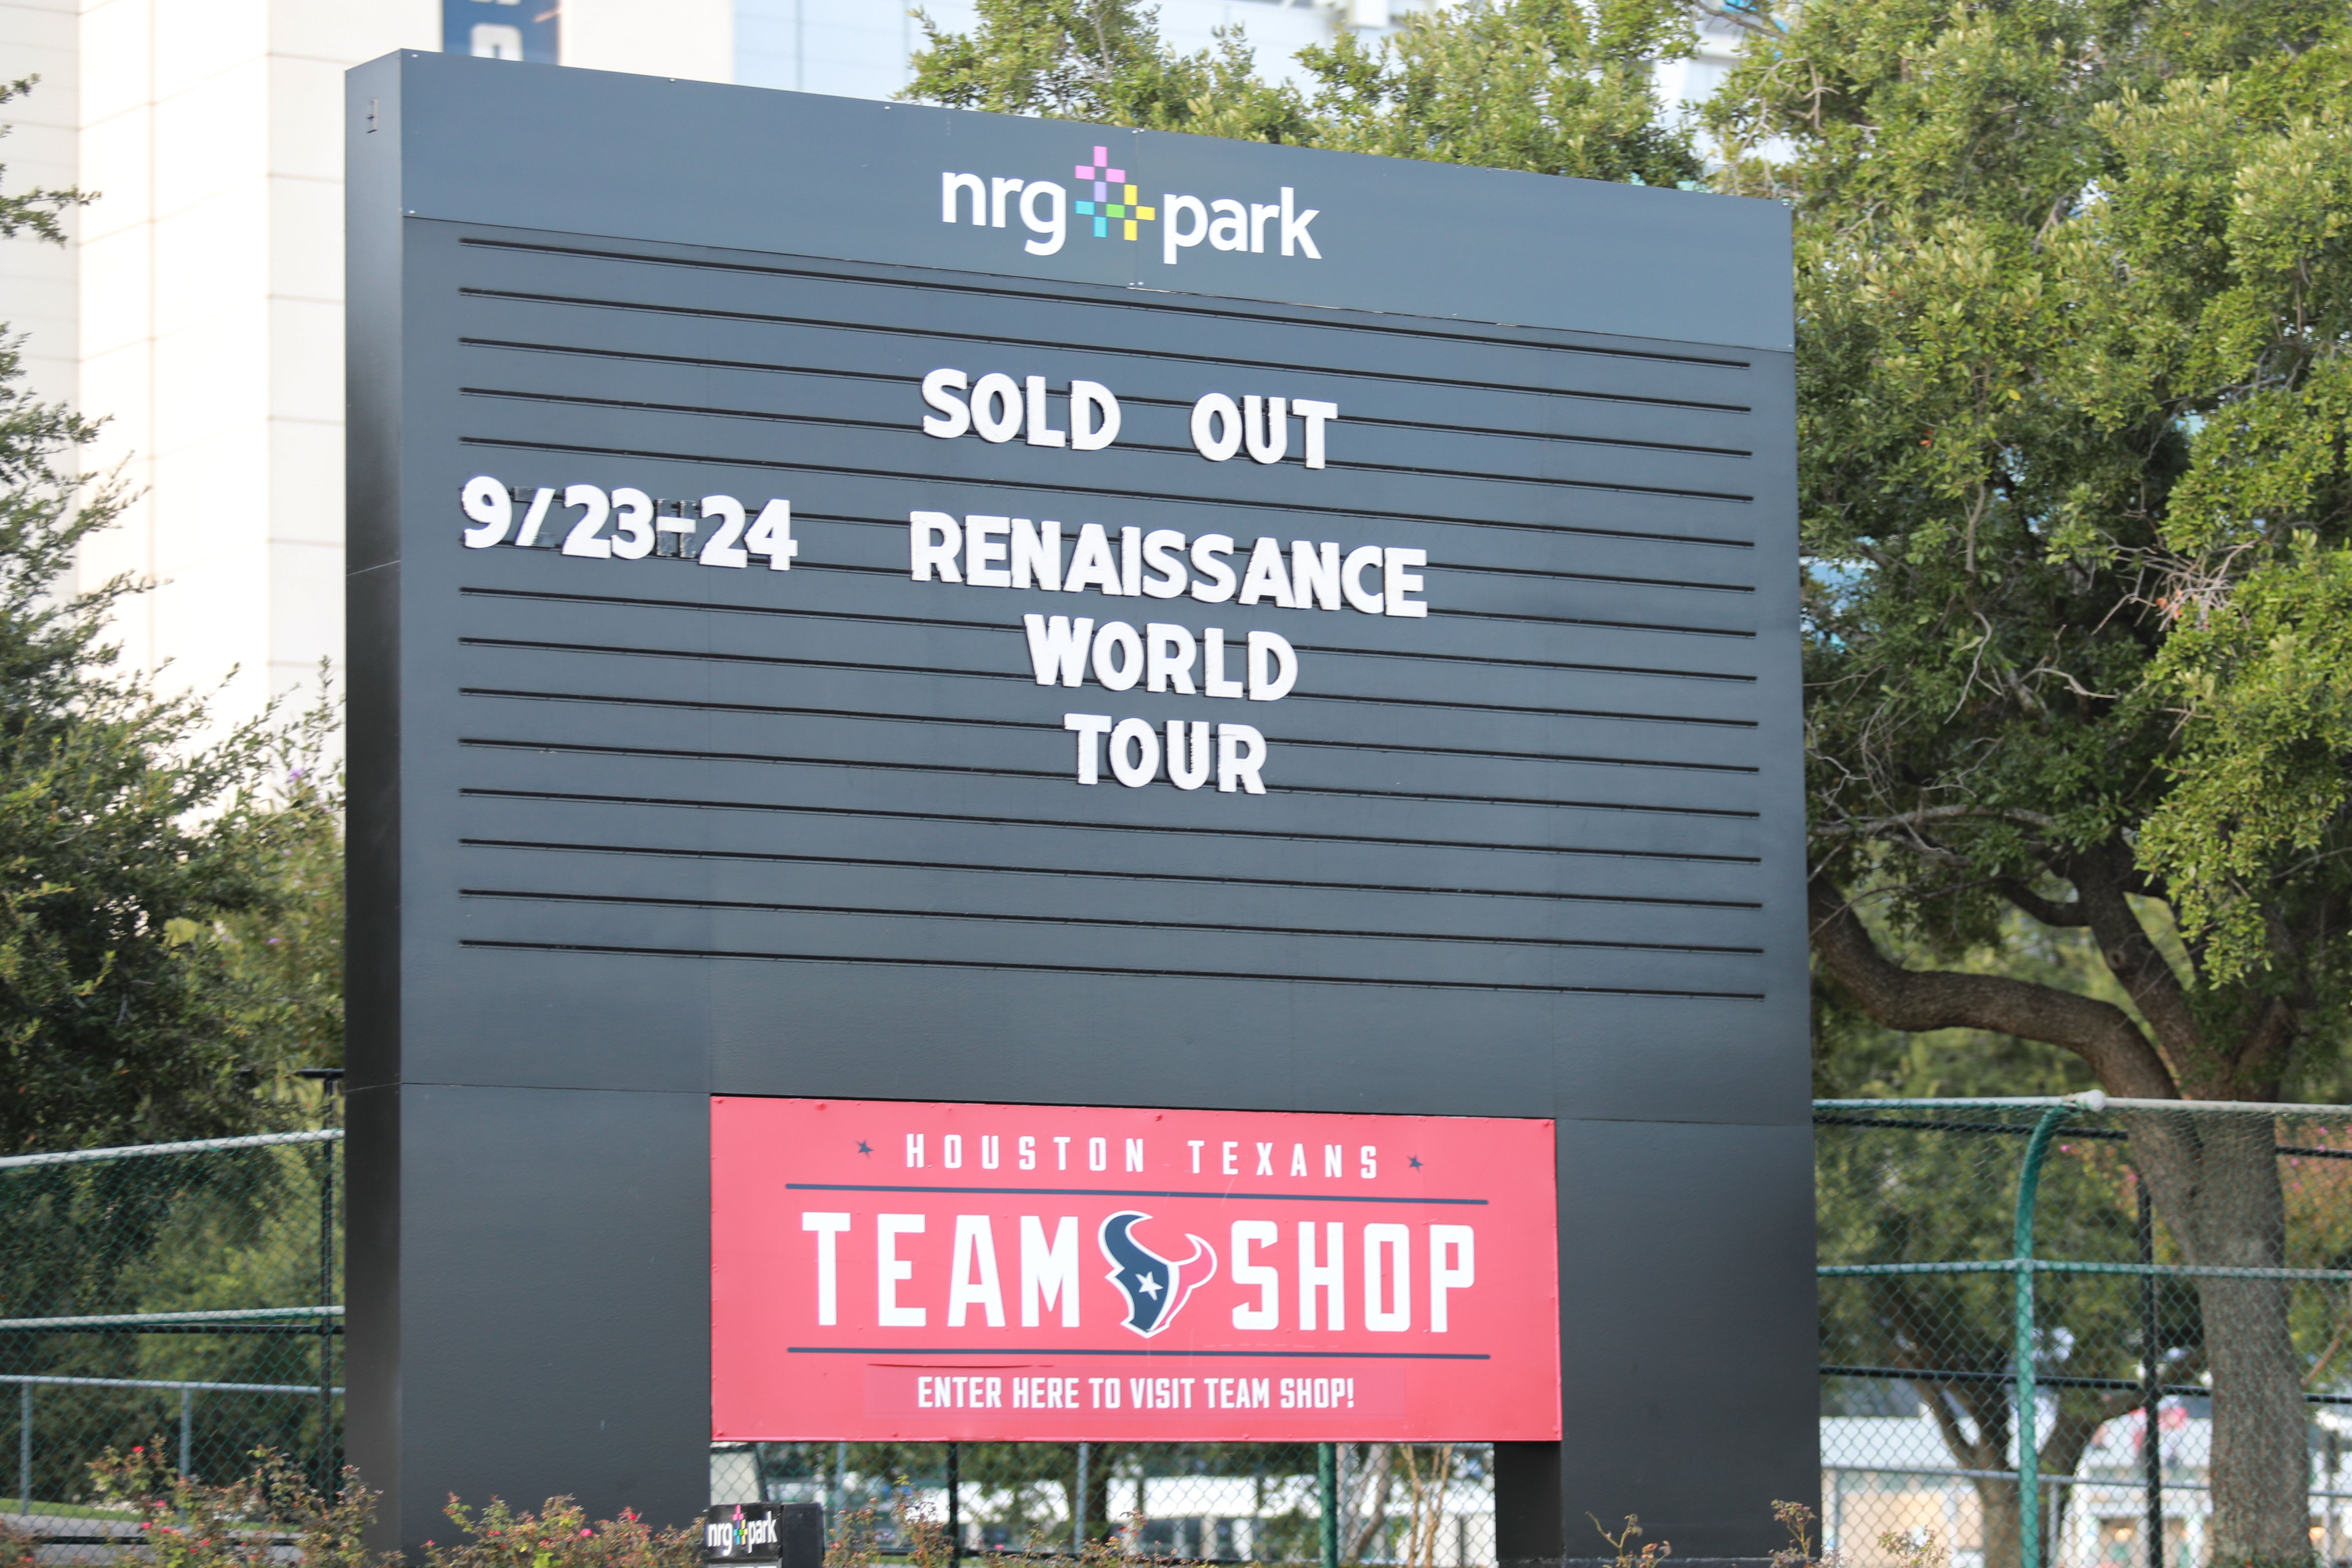 Beyonce Sold Out tour